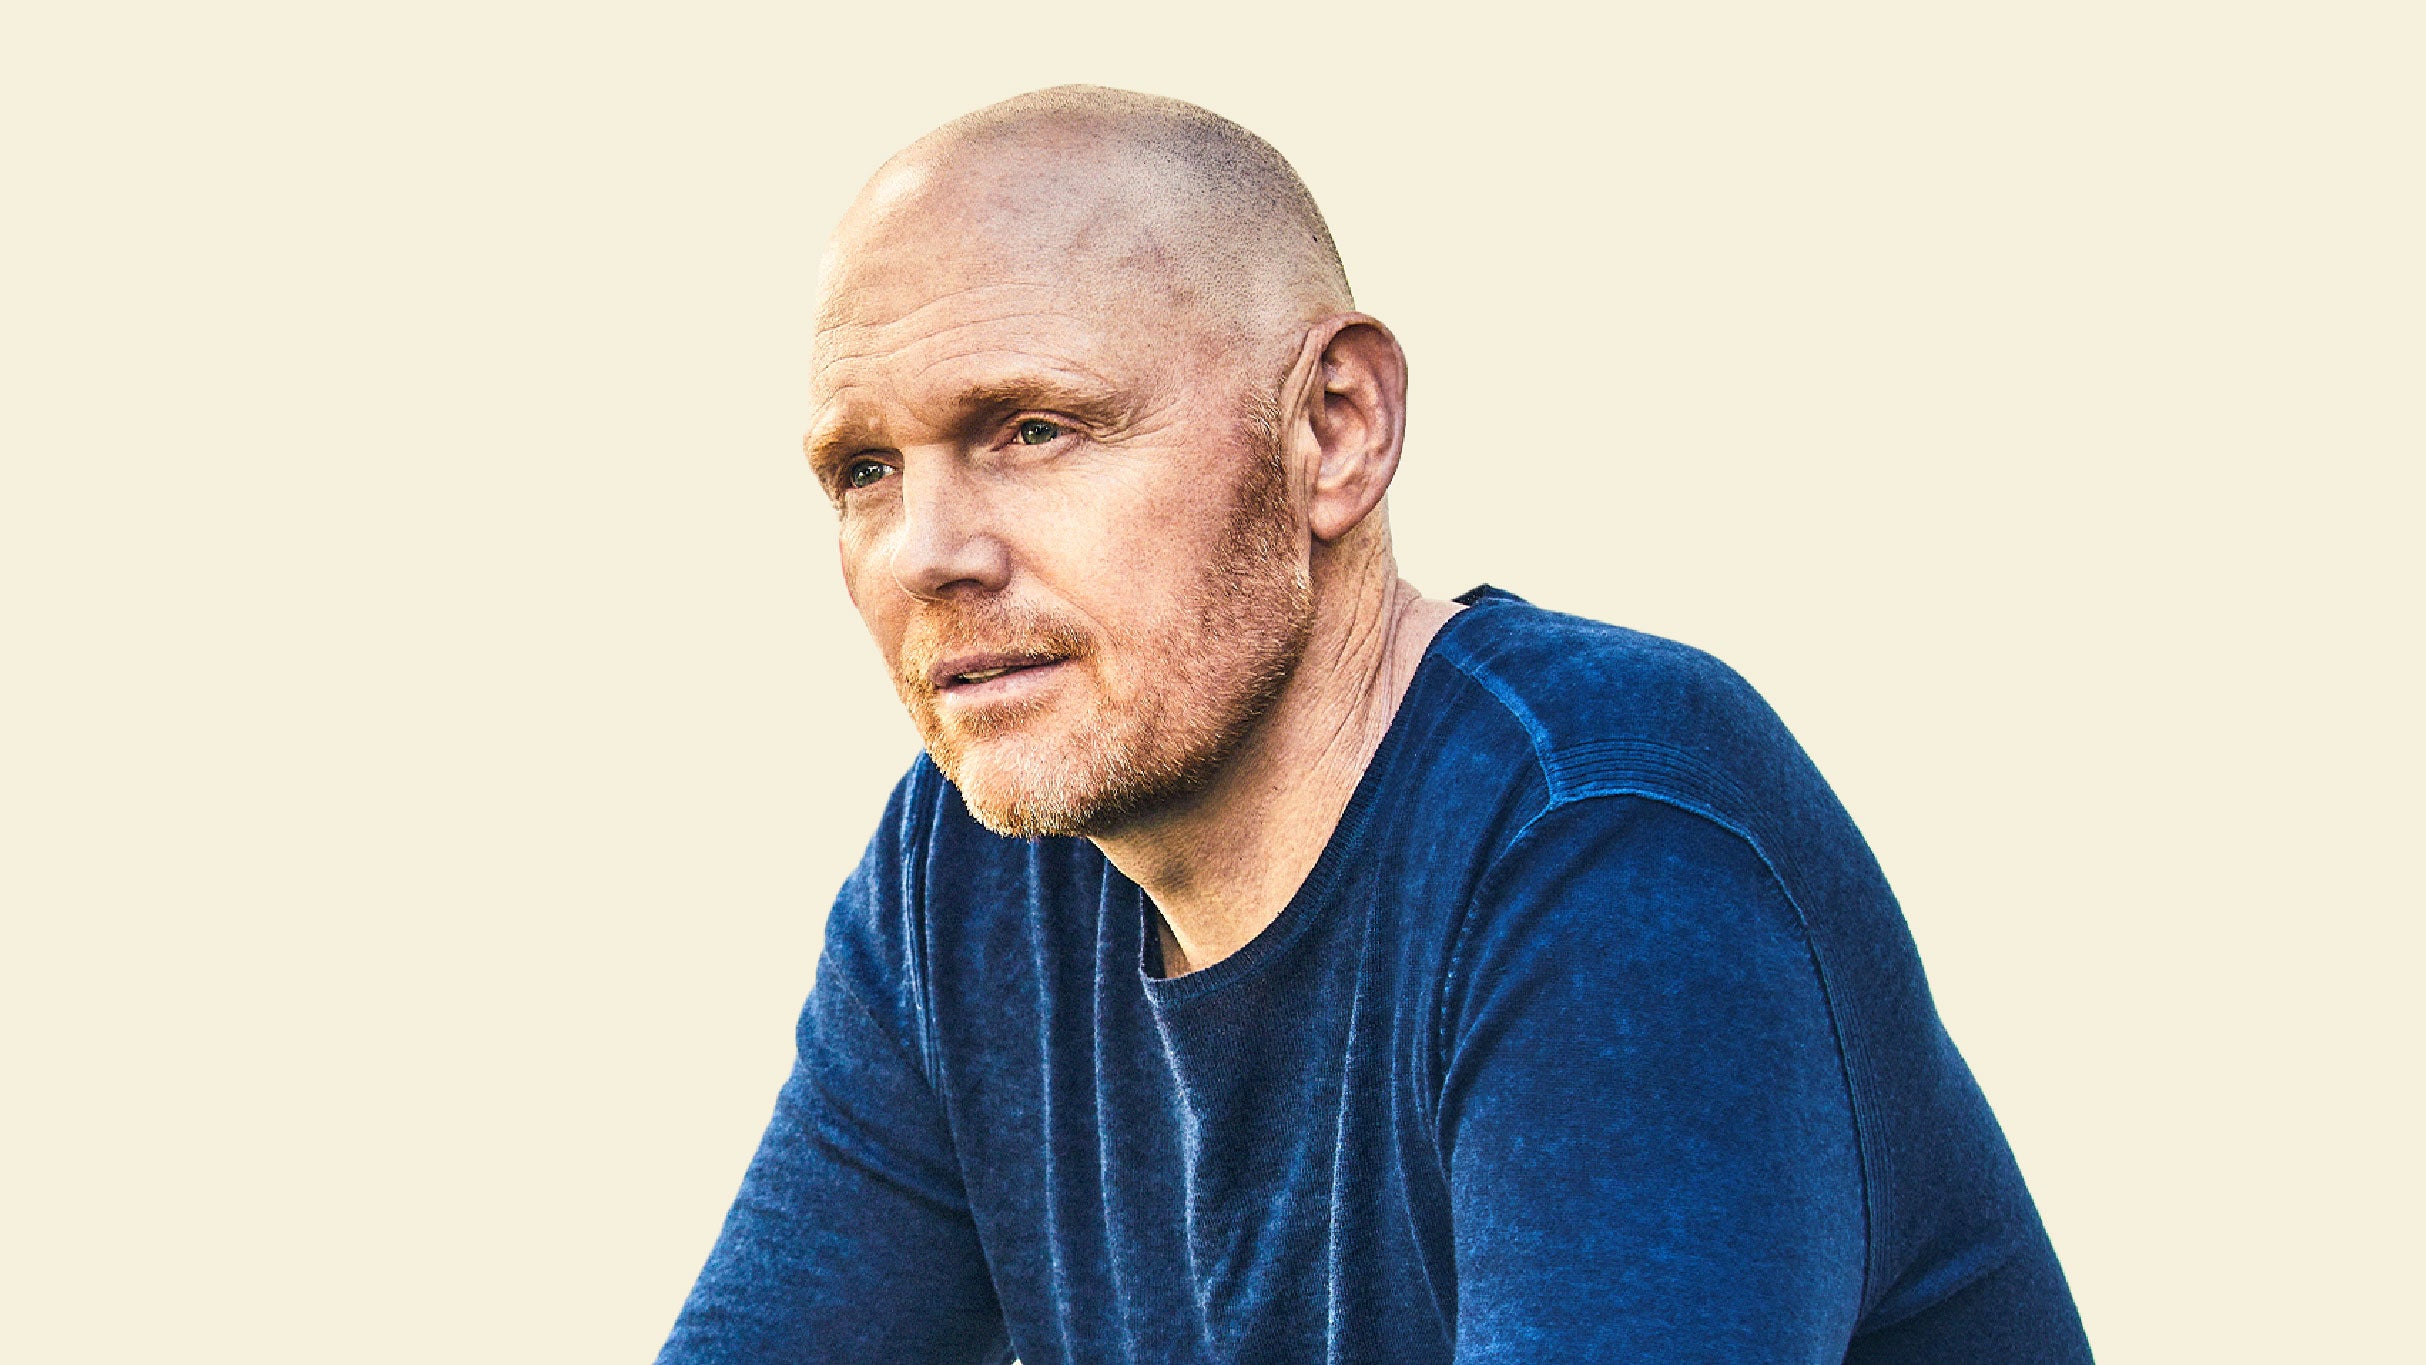 Bill Burr Live free pre-sale listing for show tickets in Canton, OH (Tom Benson Hall of Fame Stadium)